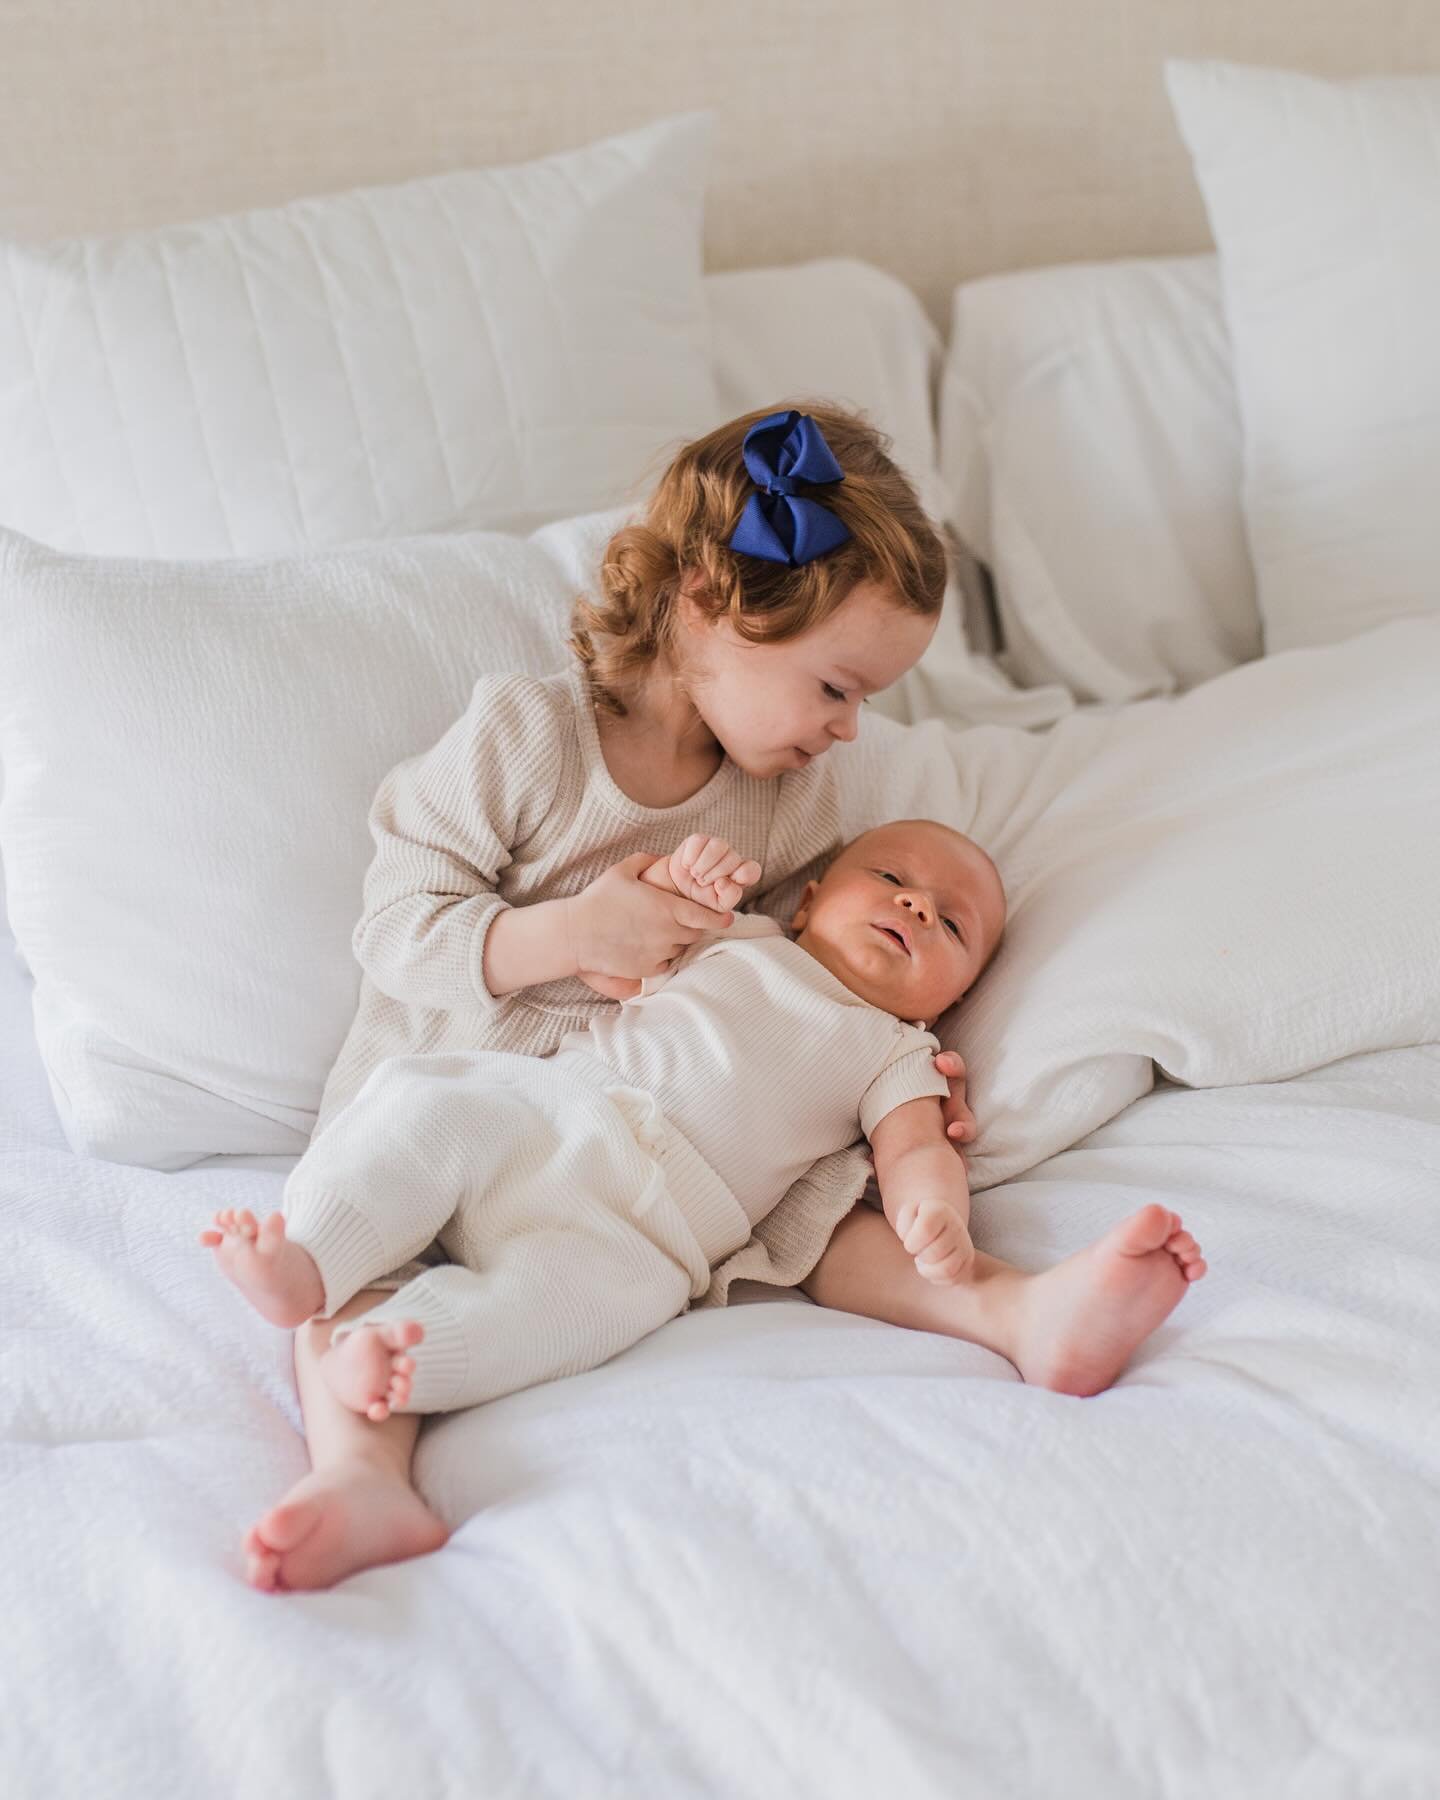 Sweet sibling moments 🥹💙

in home newborn photographer
Camas, WA family photographer